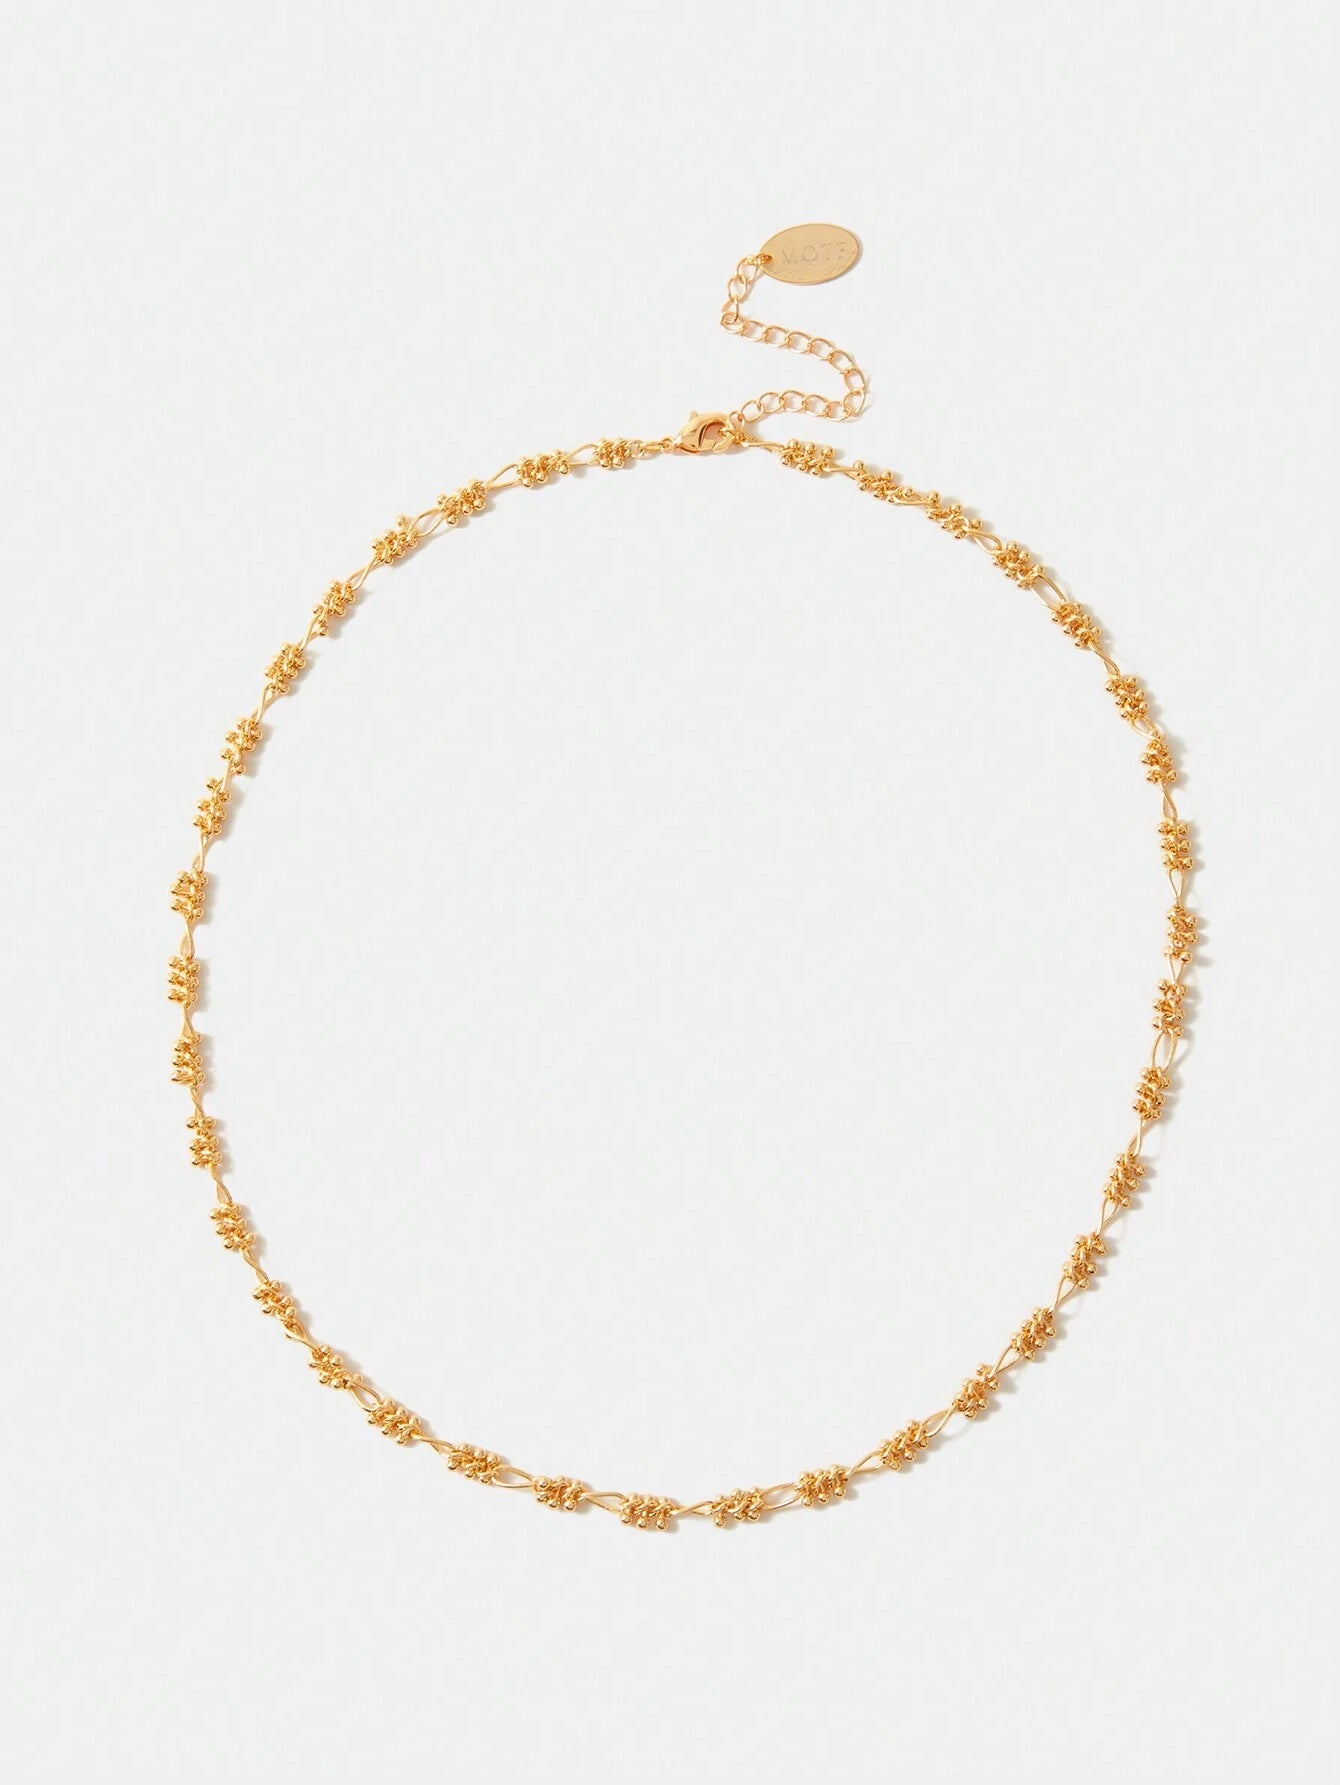 MOTF GOLD BEAD CLAVICLE CHAIN NECKLACE